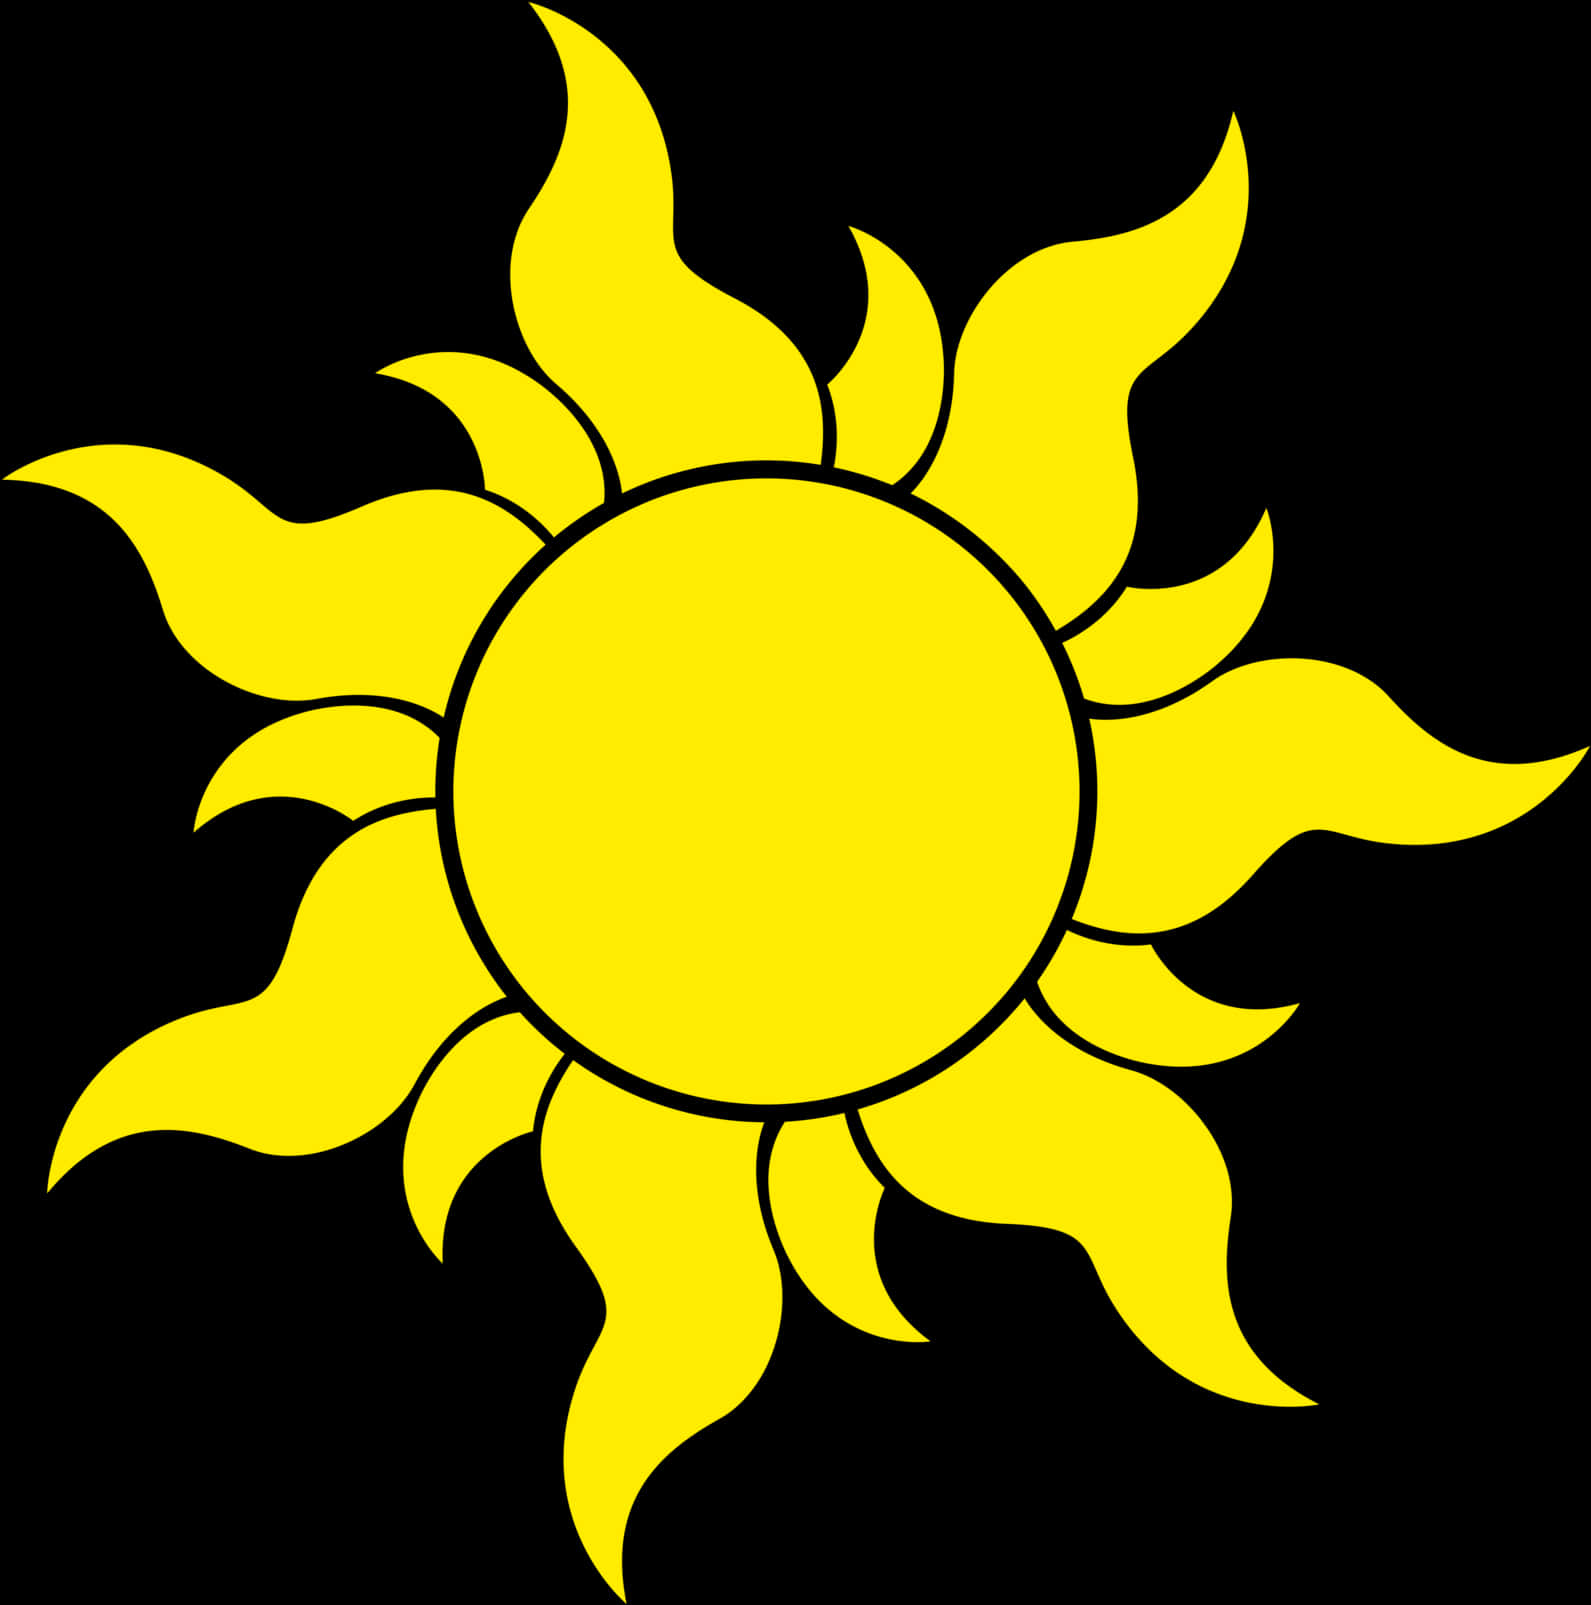 A Yellow Sun With Flames